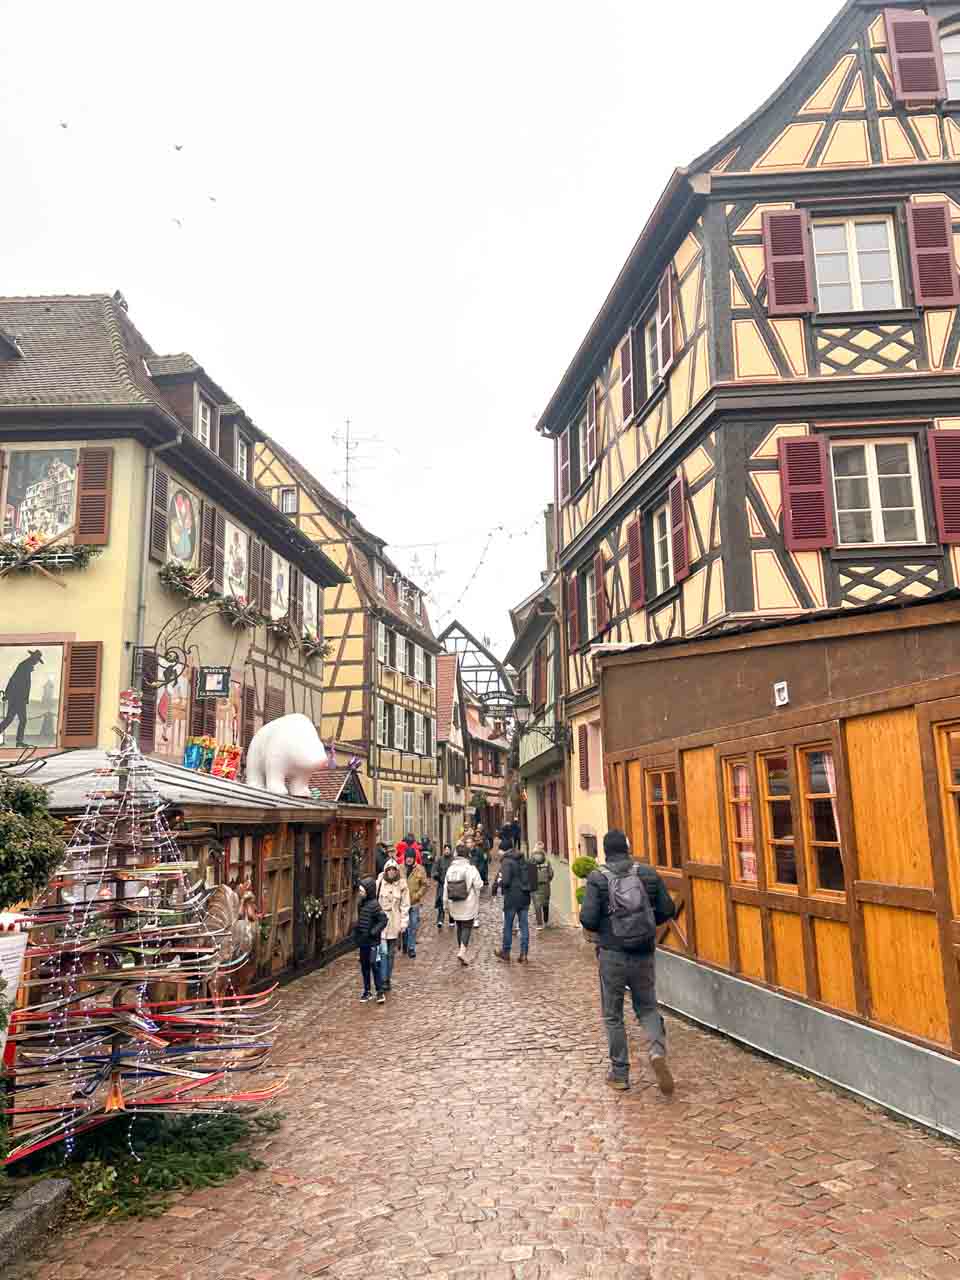 A cobblestone street in Colmar lined with traditional half-timbered houses and a Christmas market stall, with people walking and exploring